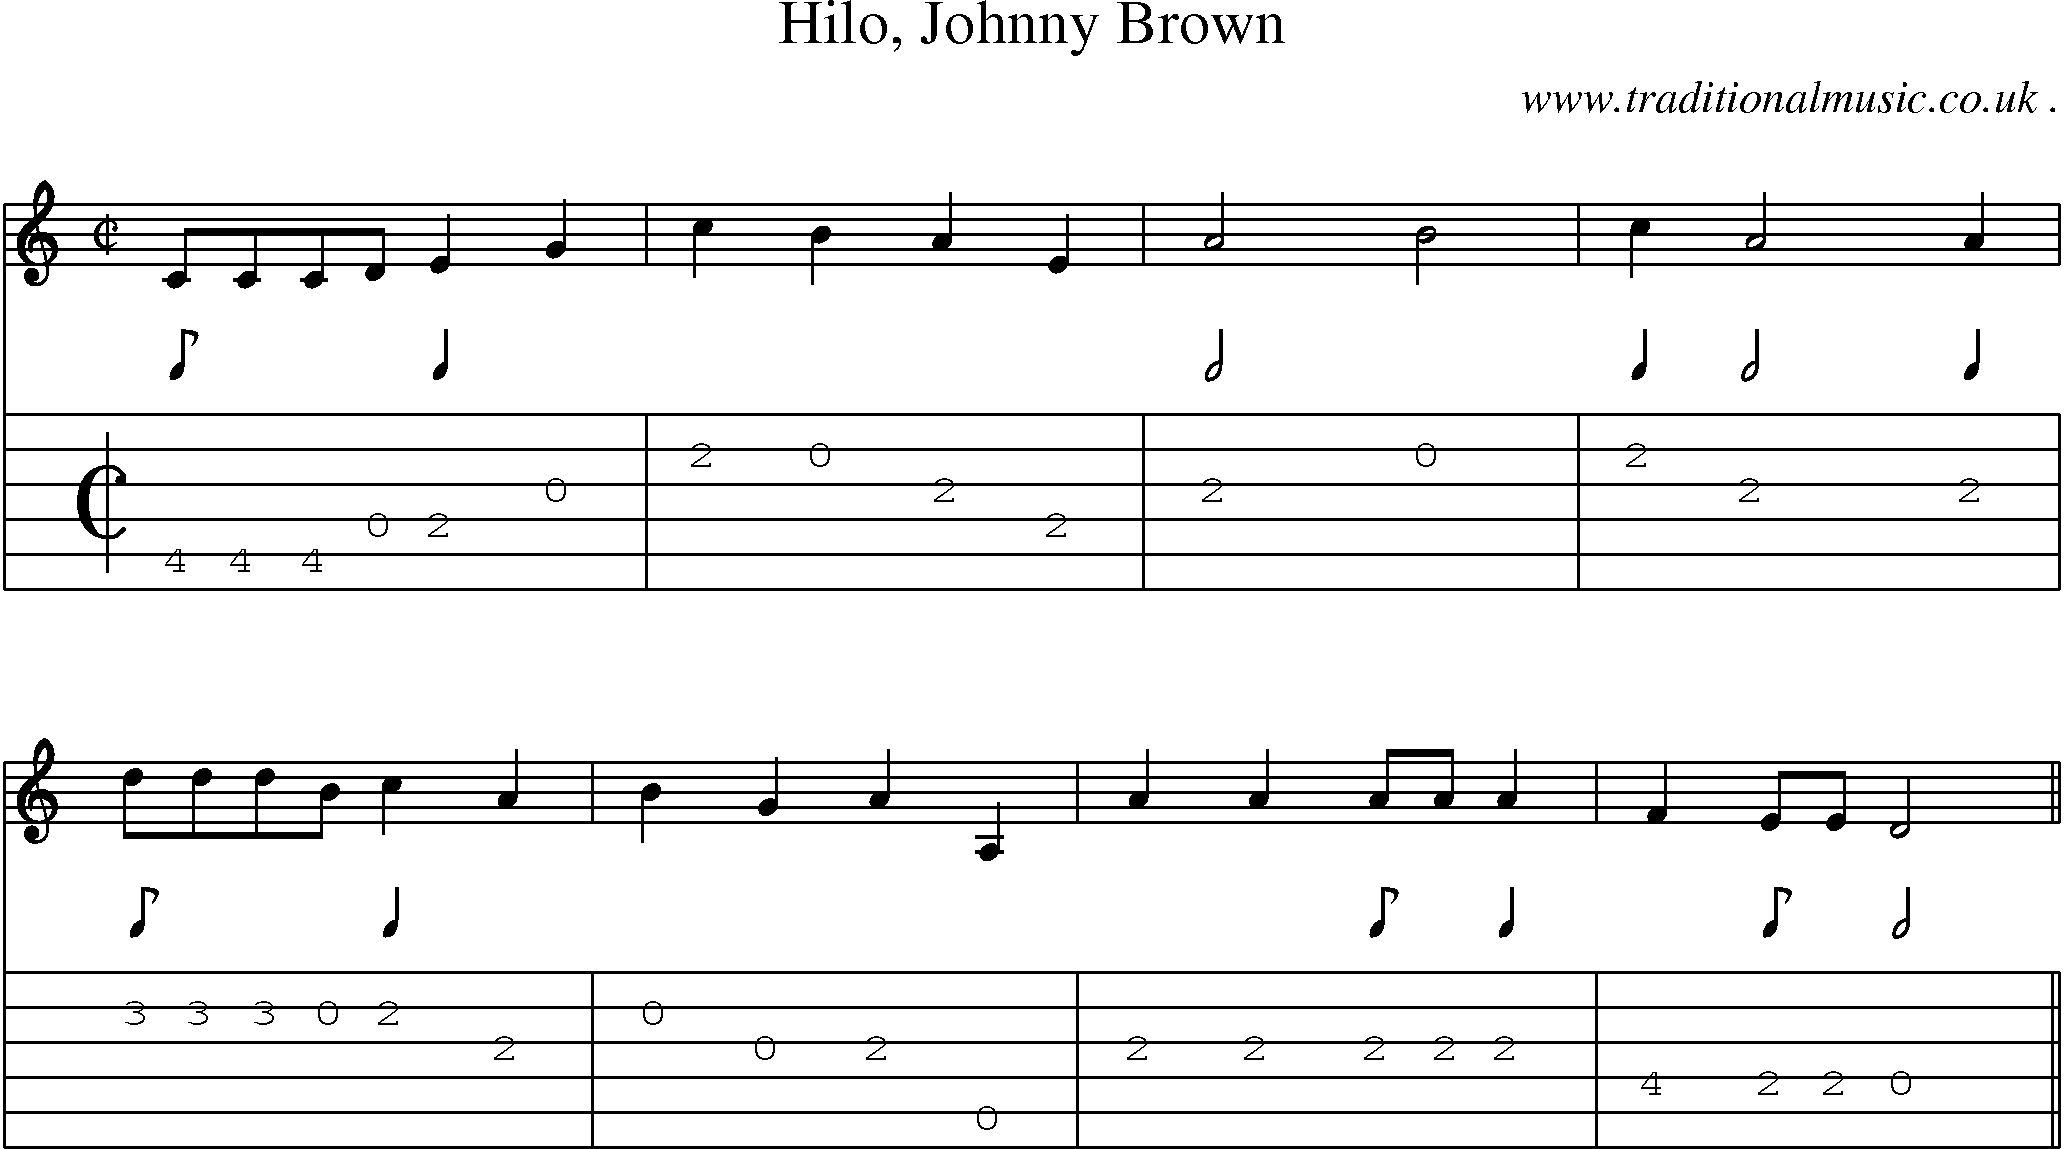 Sheet-Music and Guitar Tabs for Hilo Johnny Brown